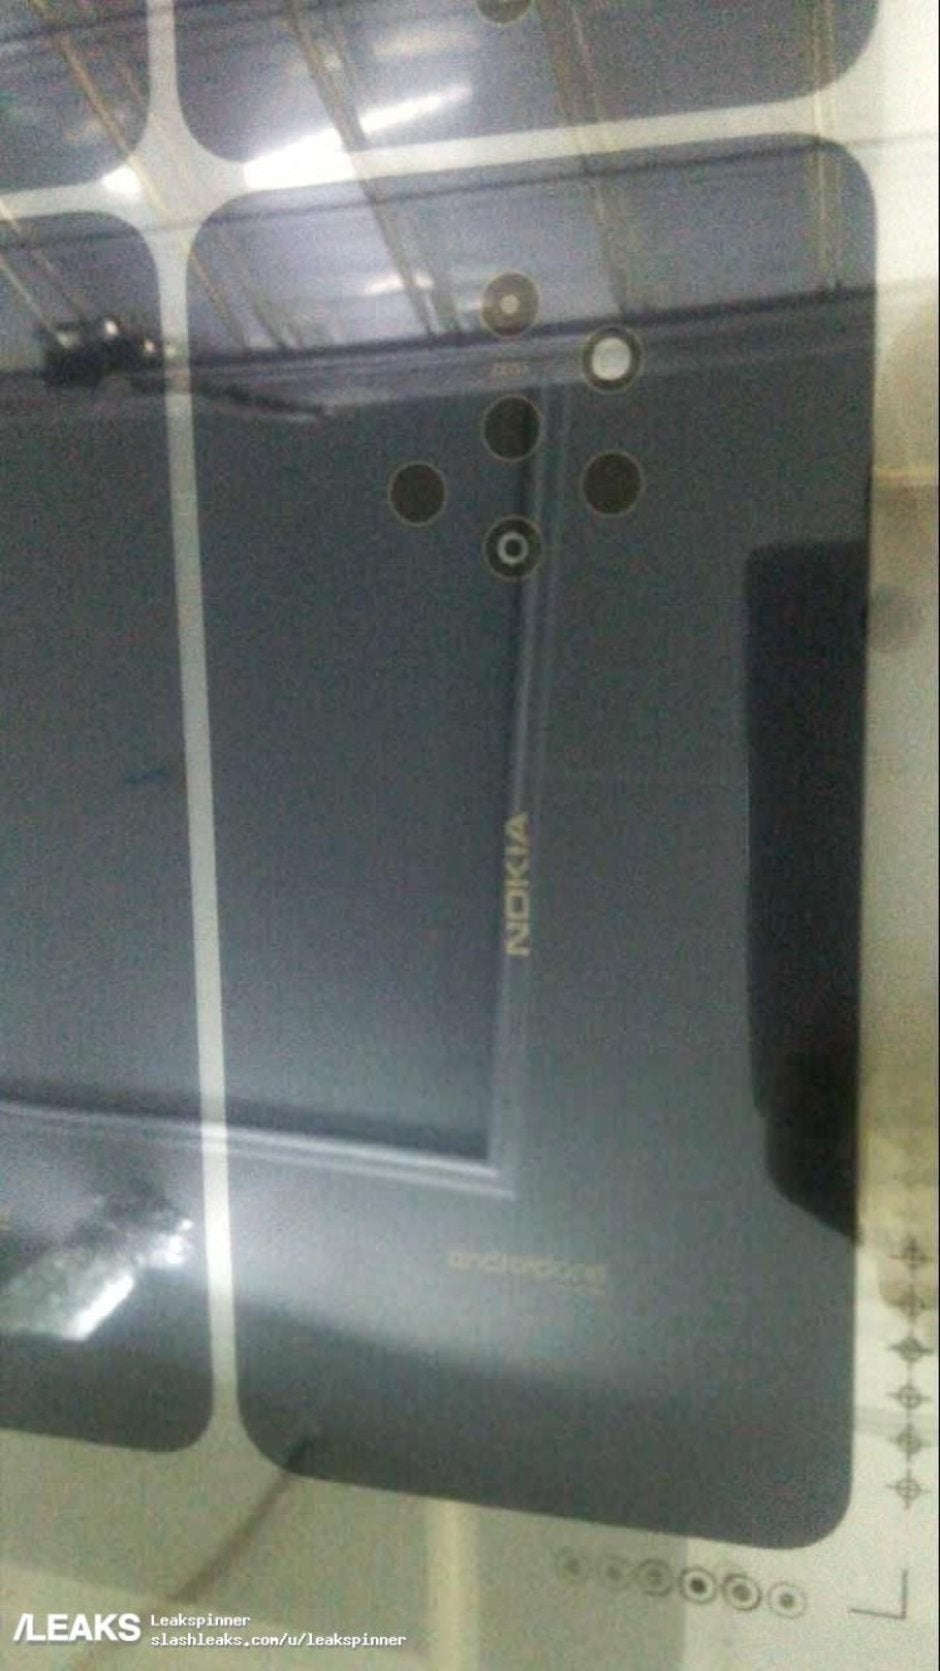 Possible Nokia 9 image leaks online revealing ridiculous camera setup